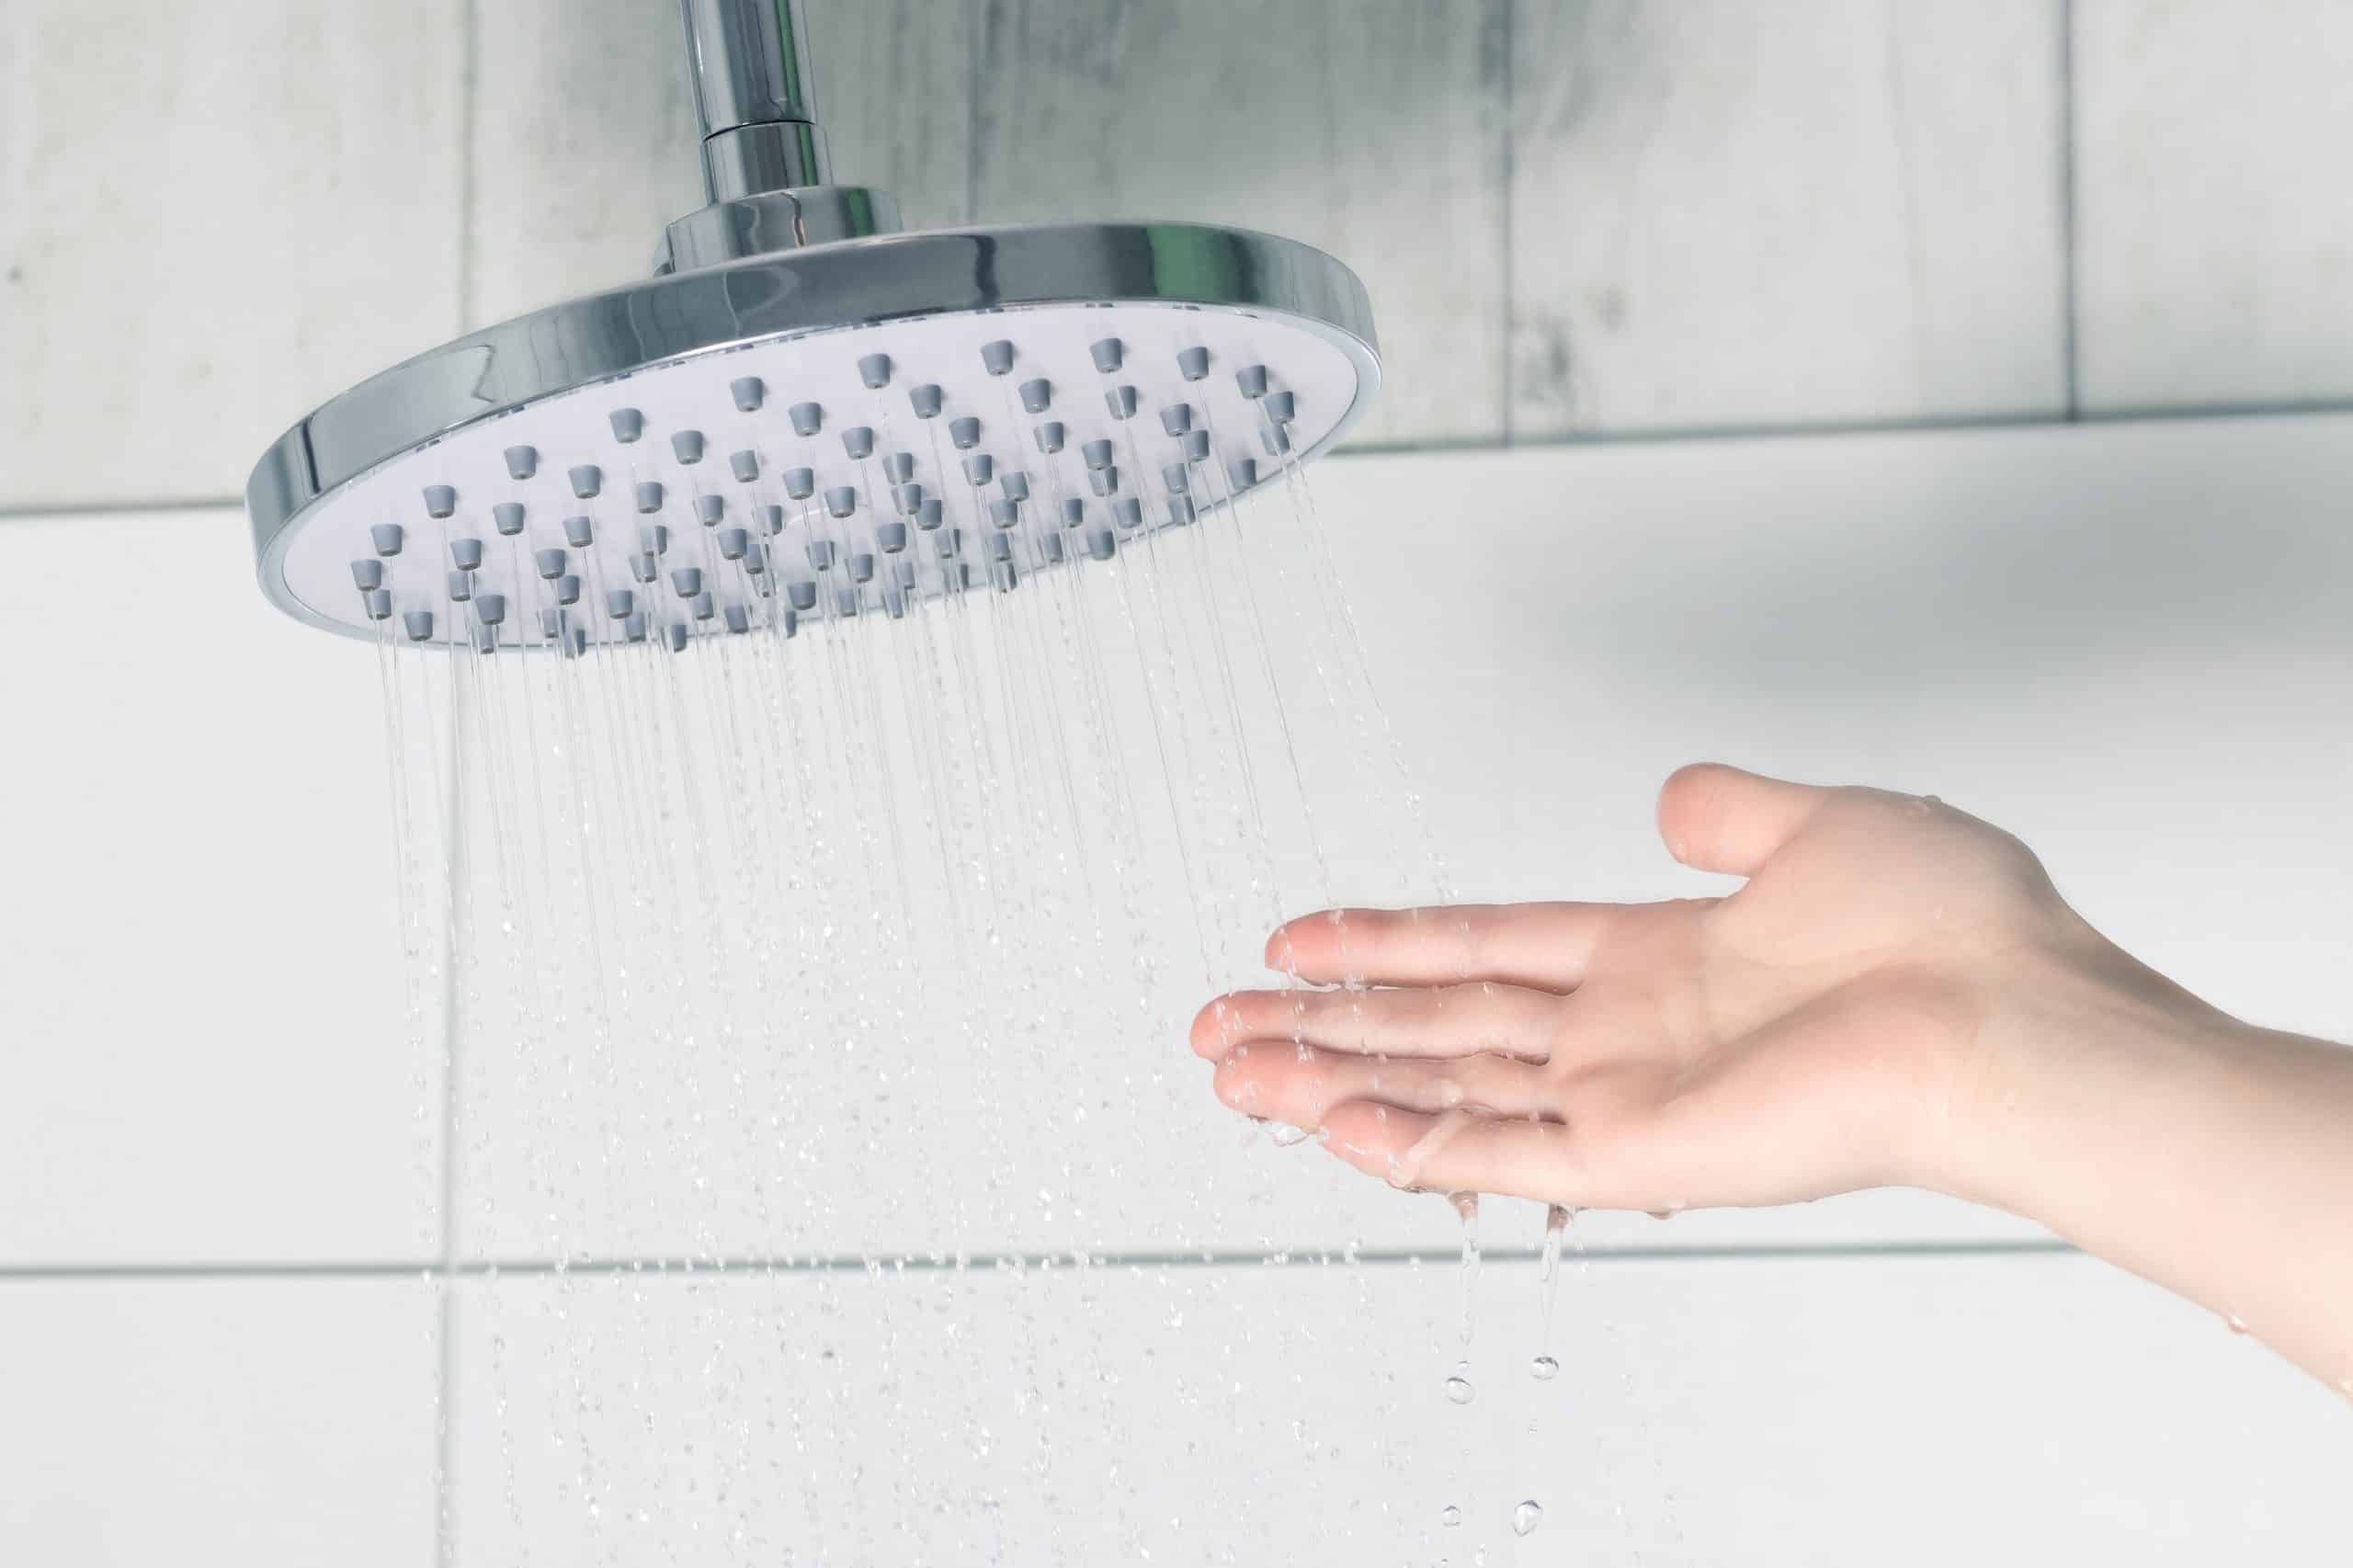 A person’s hand reaching to test the temperature of shower water to see if the water heater is functioning